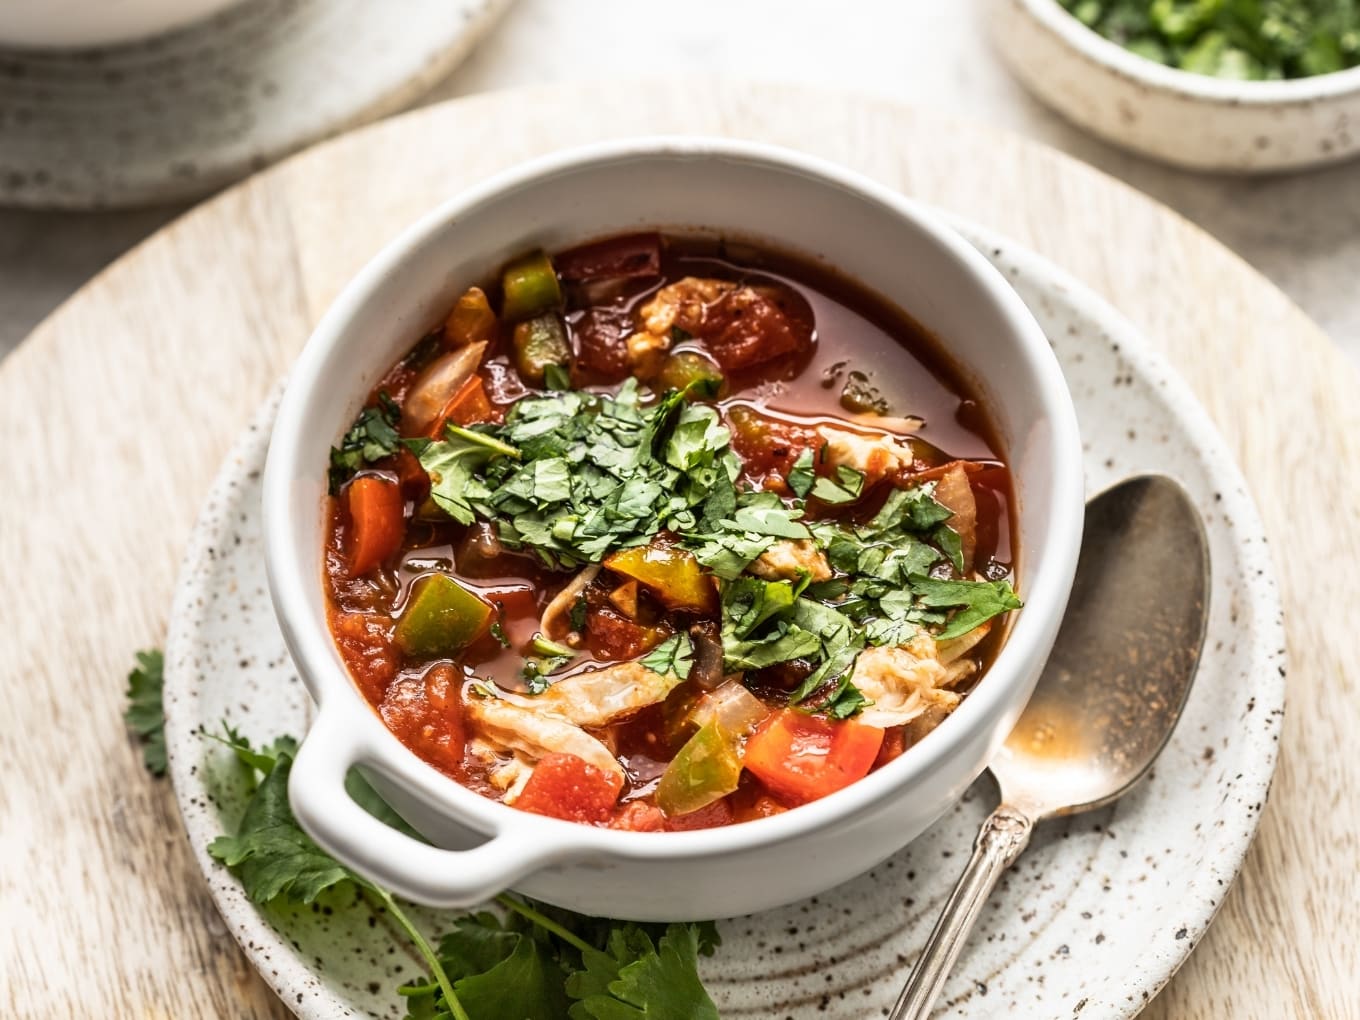 https://thewholecook.com/wp-content/uploads/2018/09/Slow-Cooker-Chicken-Fajita-Soup-by-The-Whole-Cook-horizontal.jpg